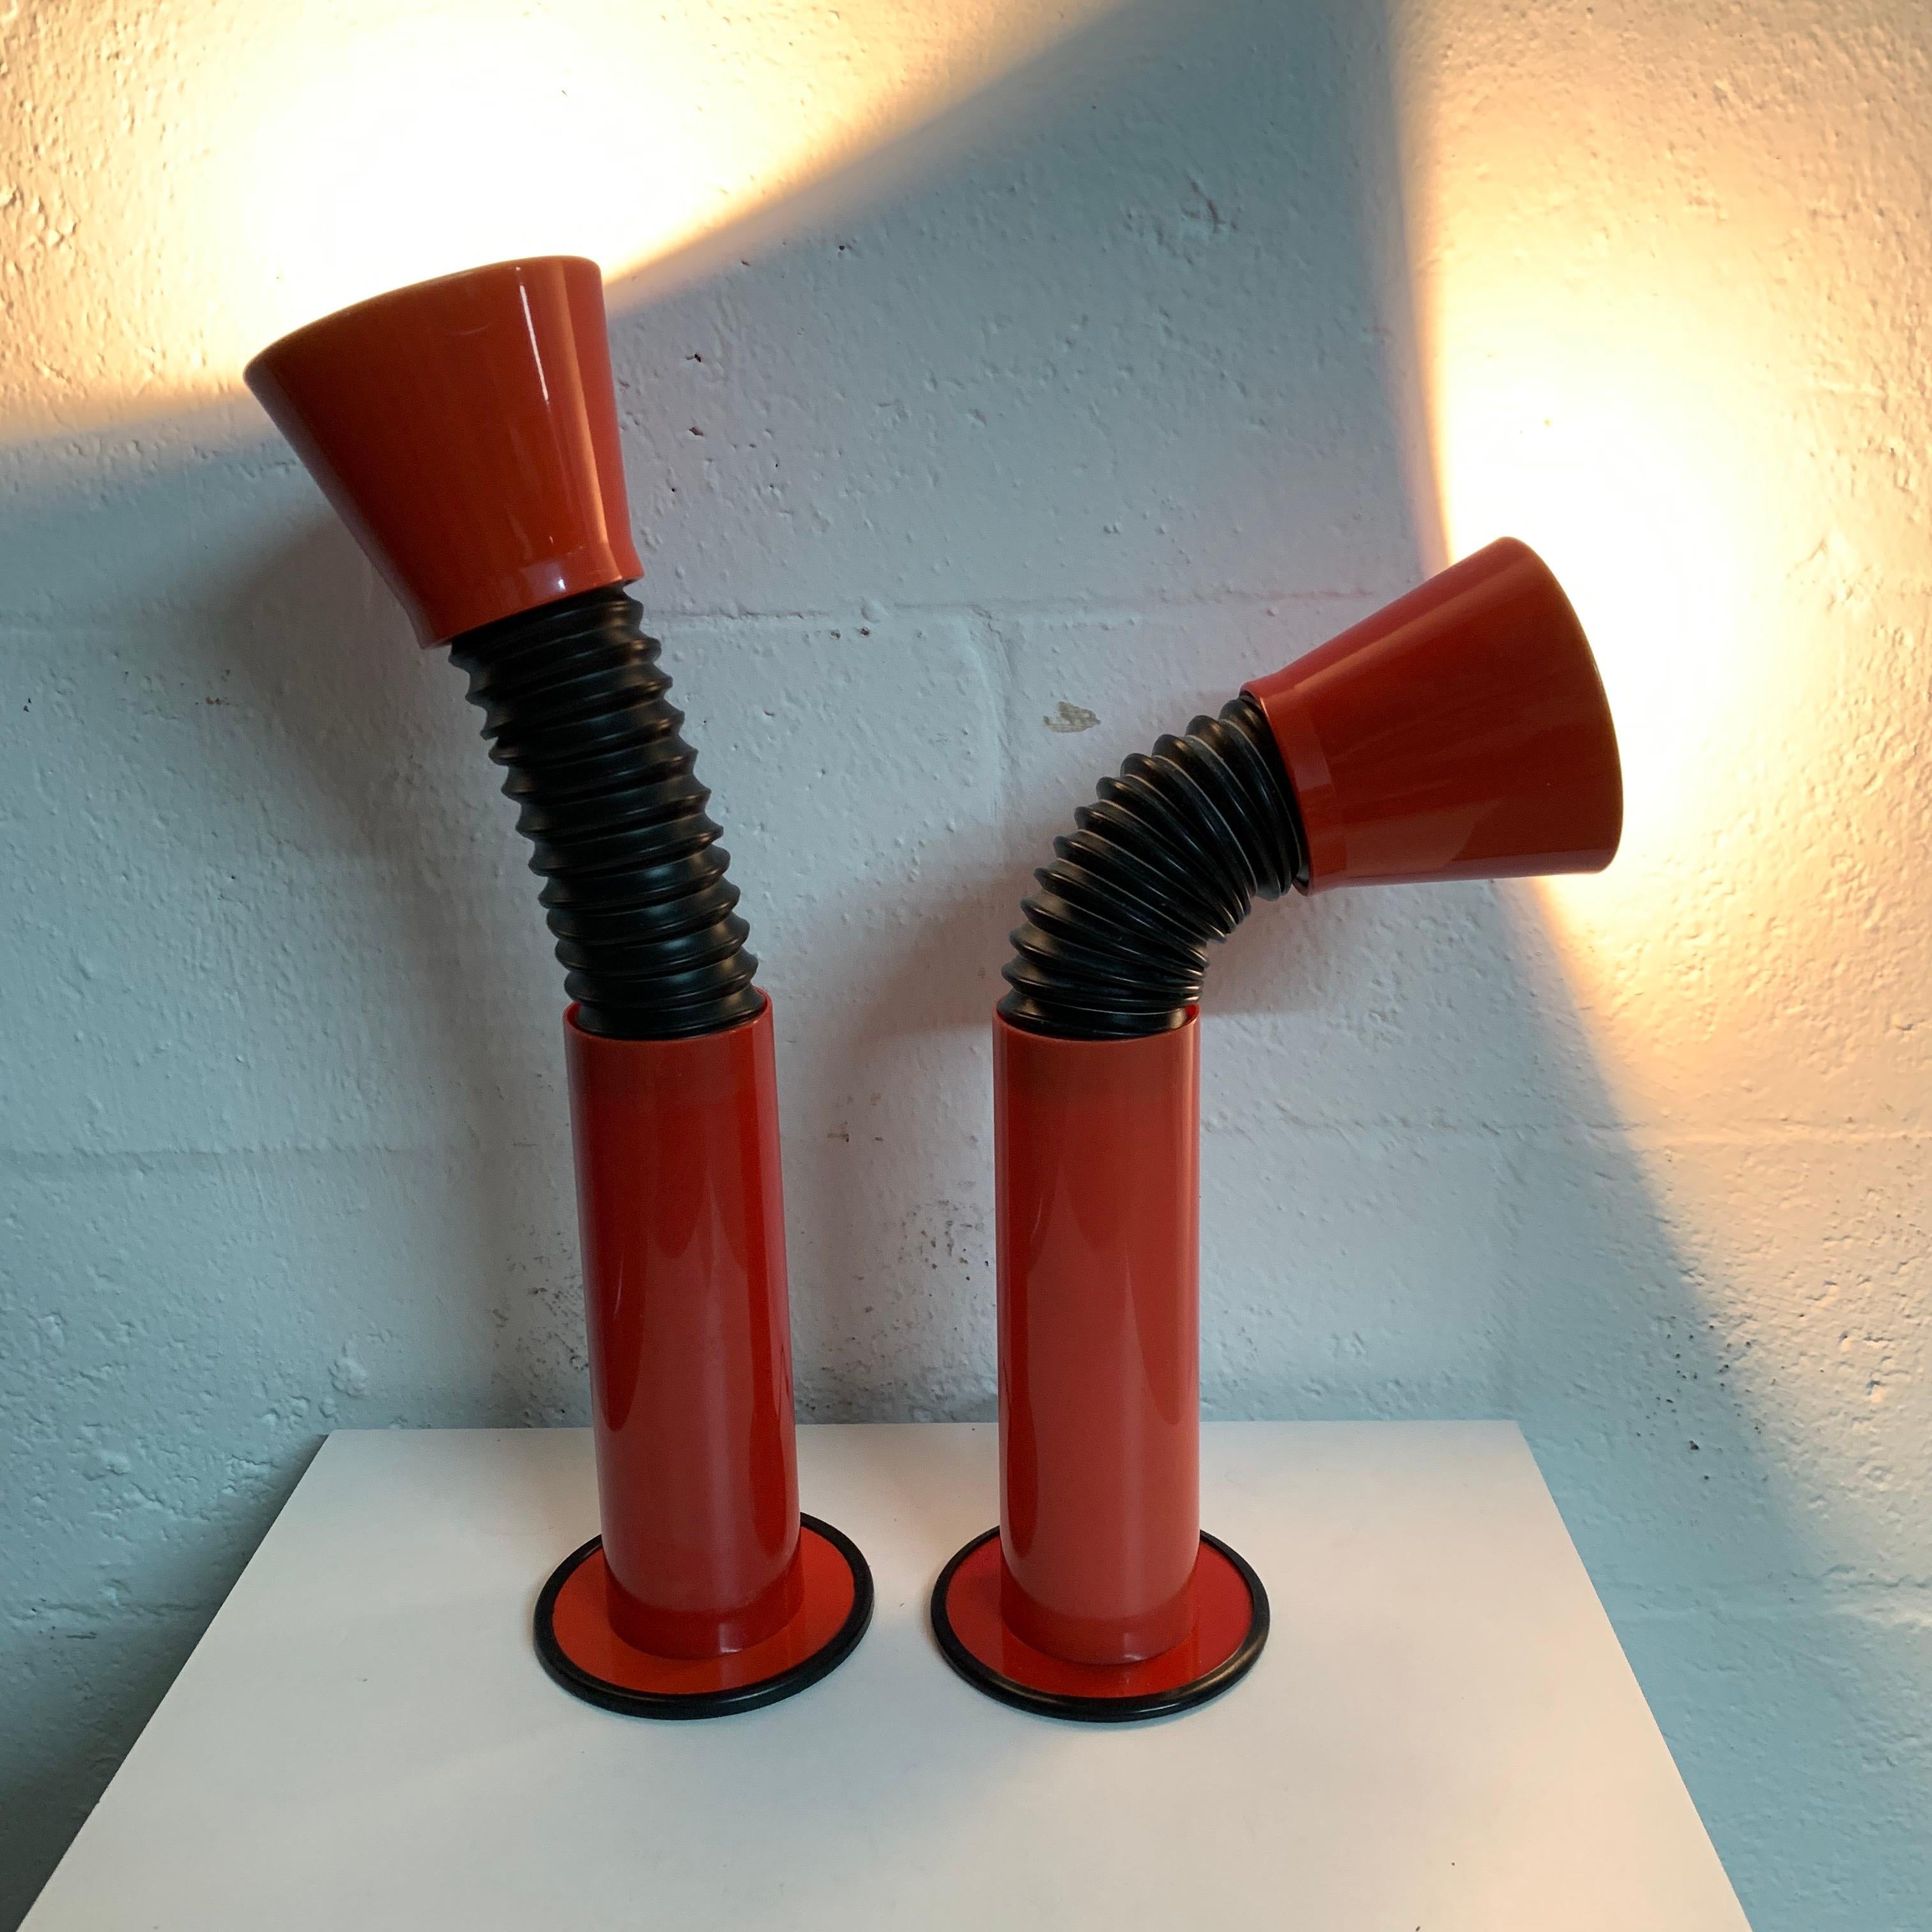 Unique pair of adjustable goose neck table desk or task lamps rendered in Red metal and plastic with a black gooseneck and cone shade head, Italy, 1980s.